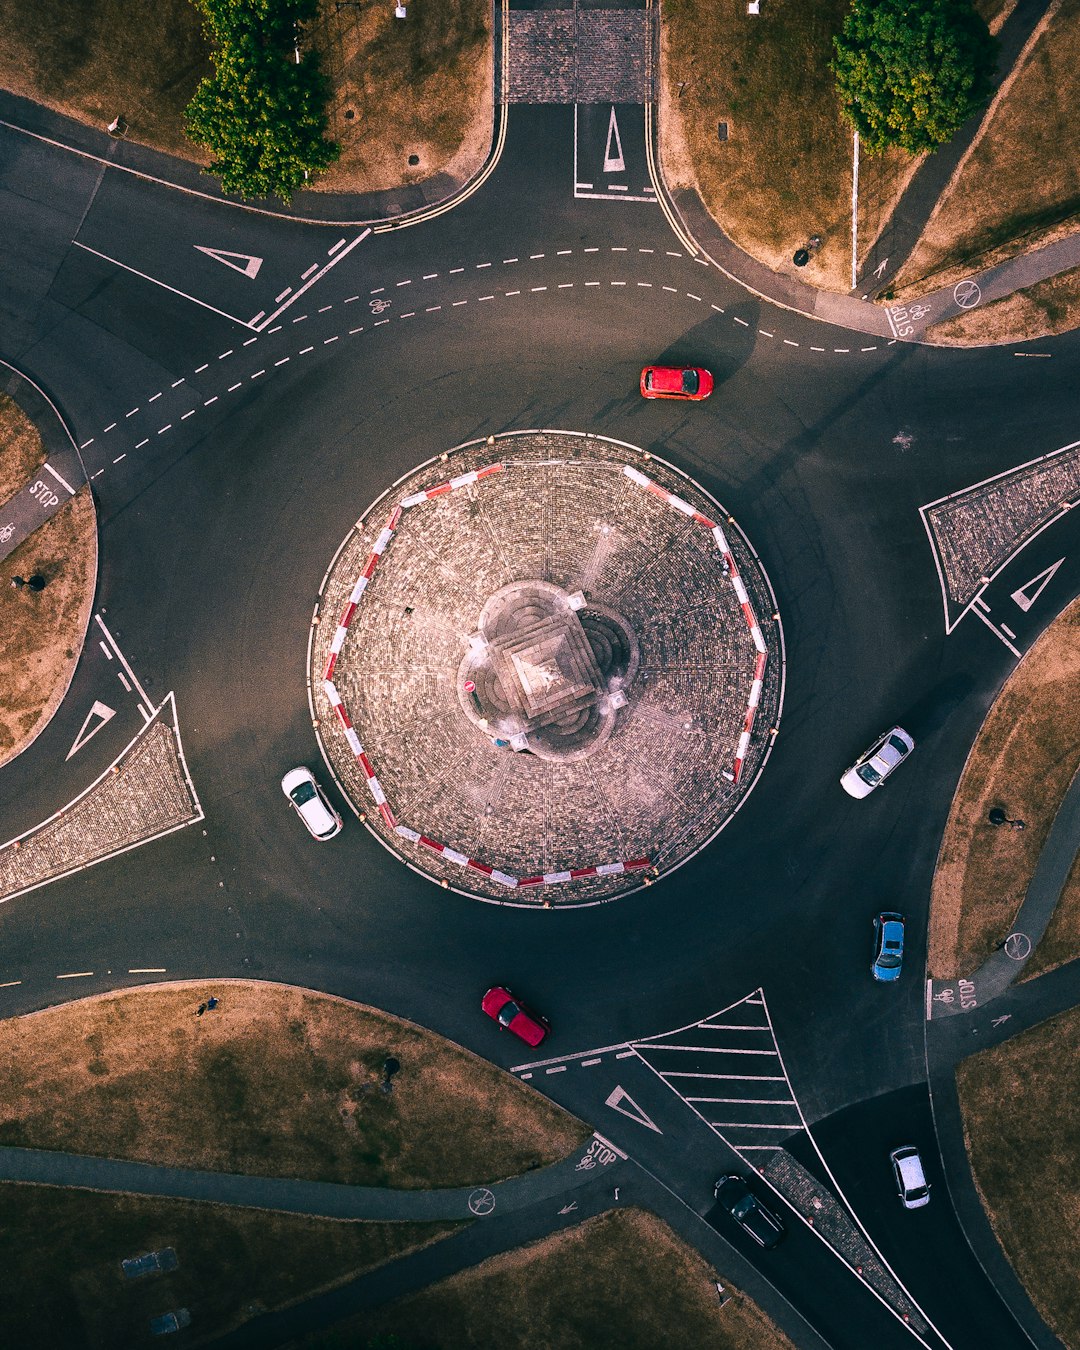 The Phoenix Park Monument stands  in the the center of this roundabout, located right in the middle of Phoenix Park. This monument is often confused with the Wellington Monument, a much larger and famous  marker of the park.